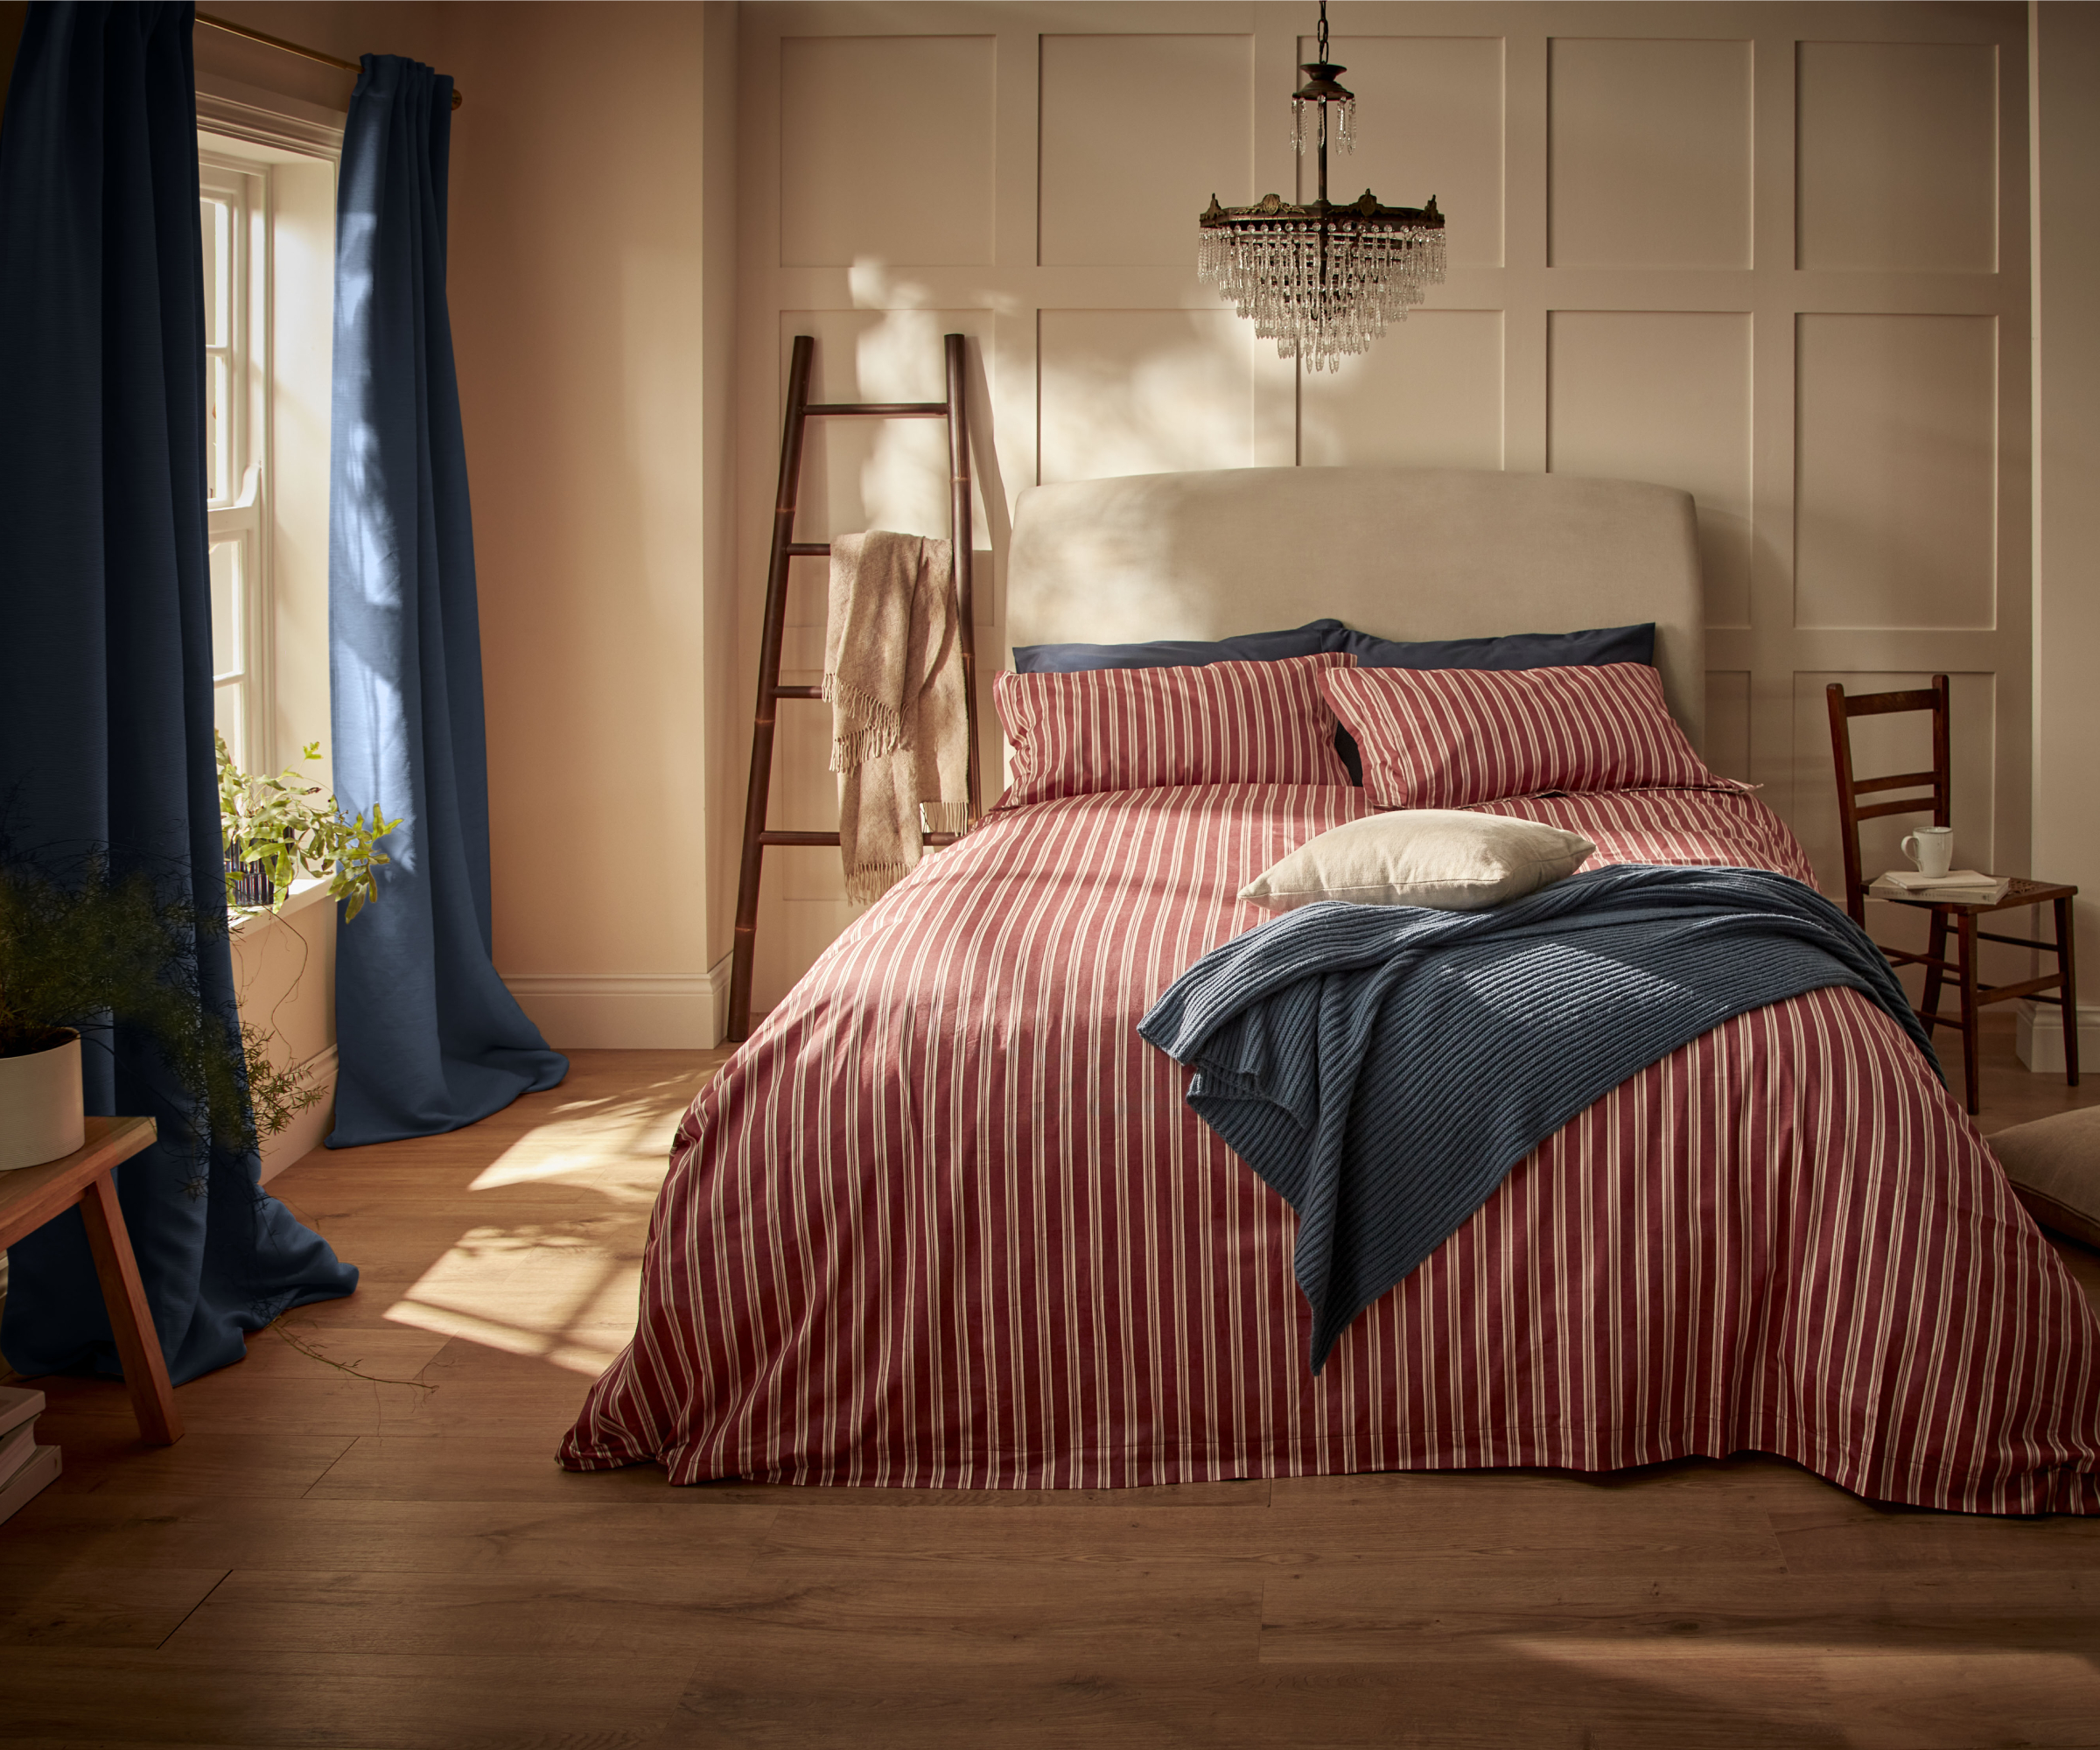 red and white striped bed linen on bed with cream headboard and blue throw